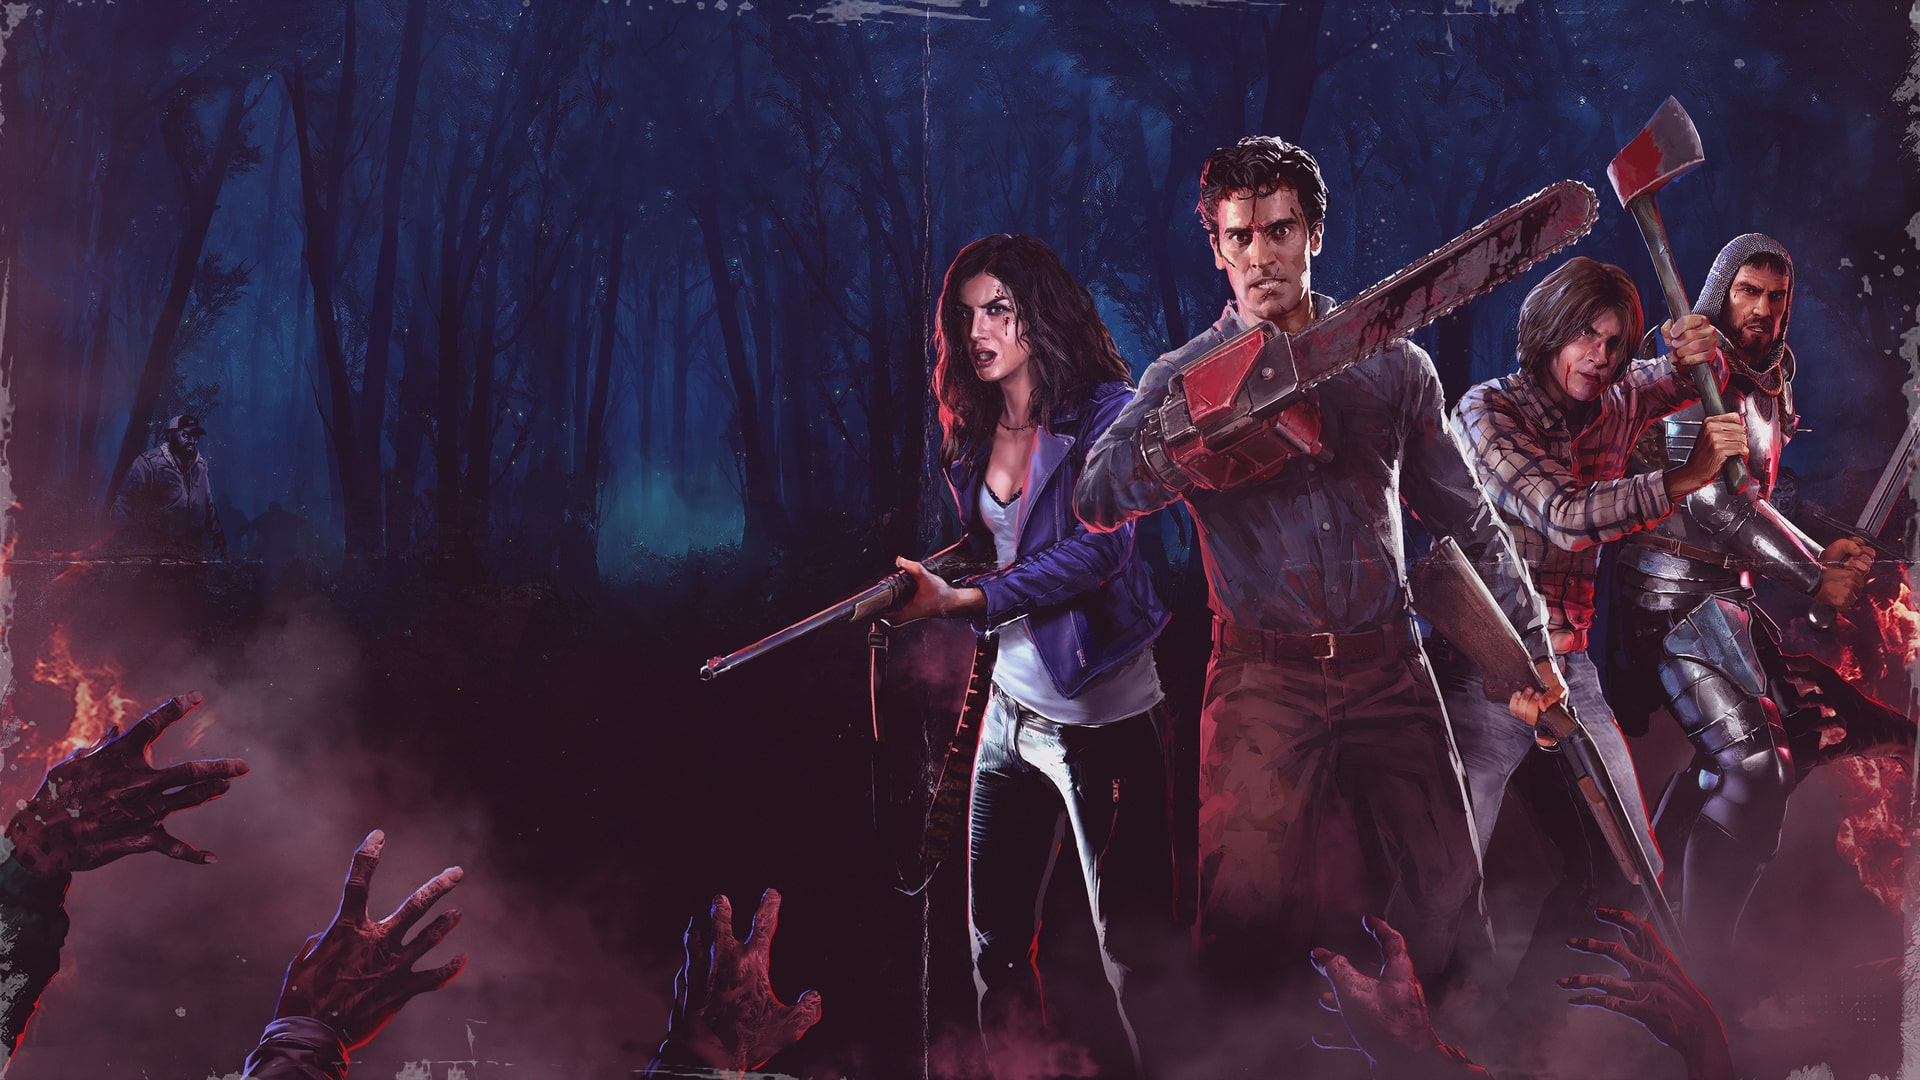 Evil Dead: The Game, PlayStation 5, Nighthawk Interactive, 812303017209 